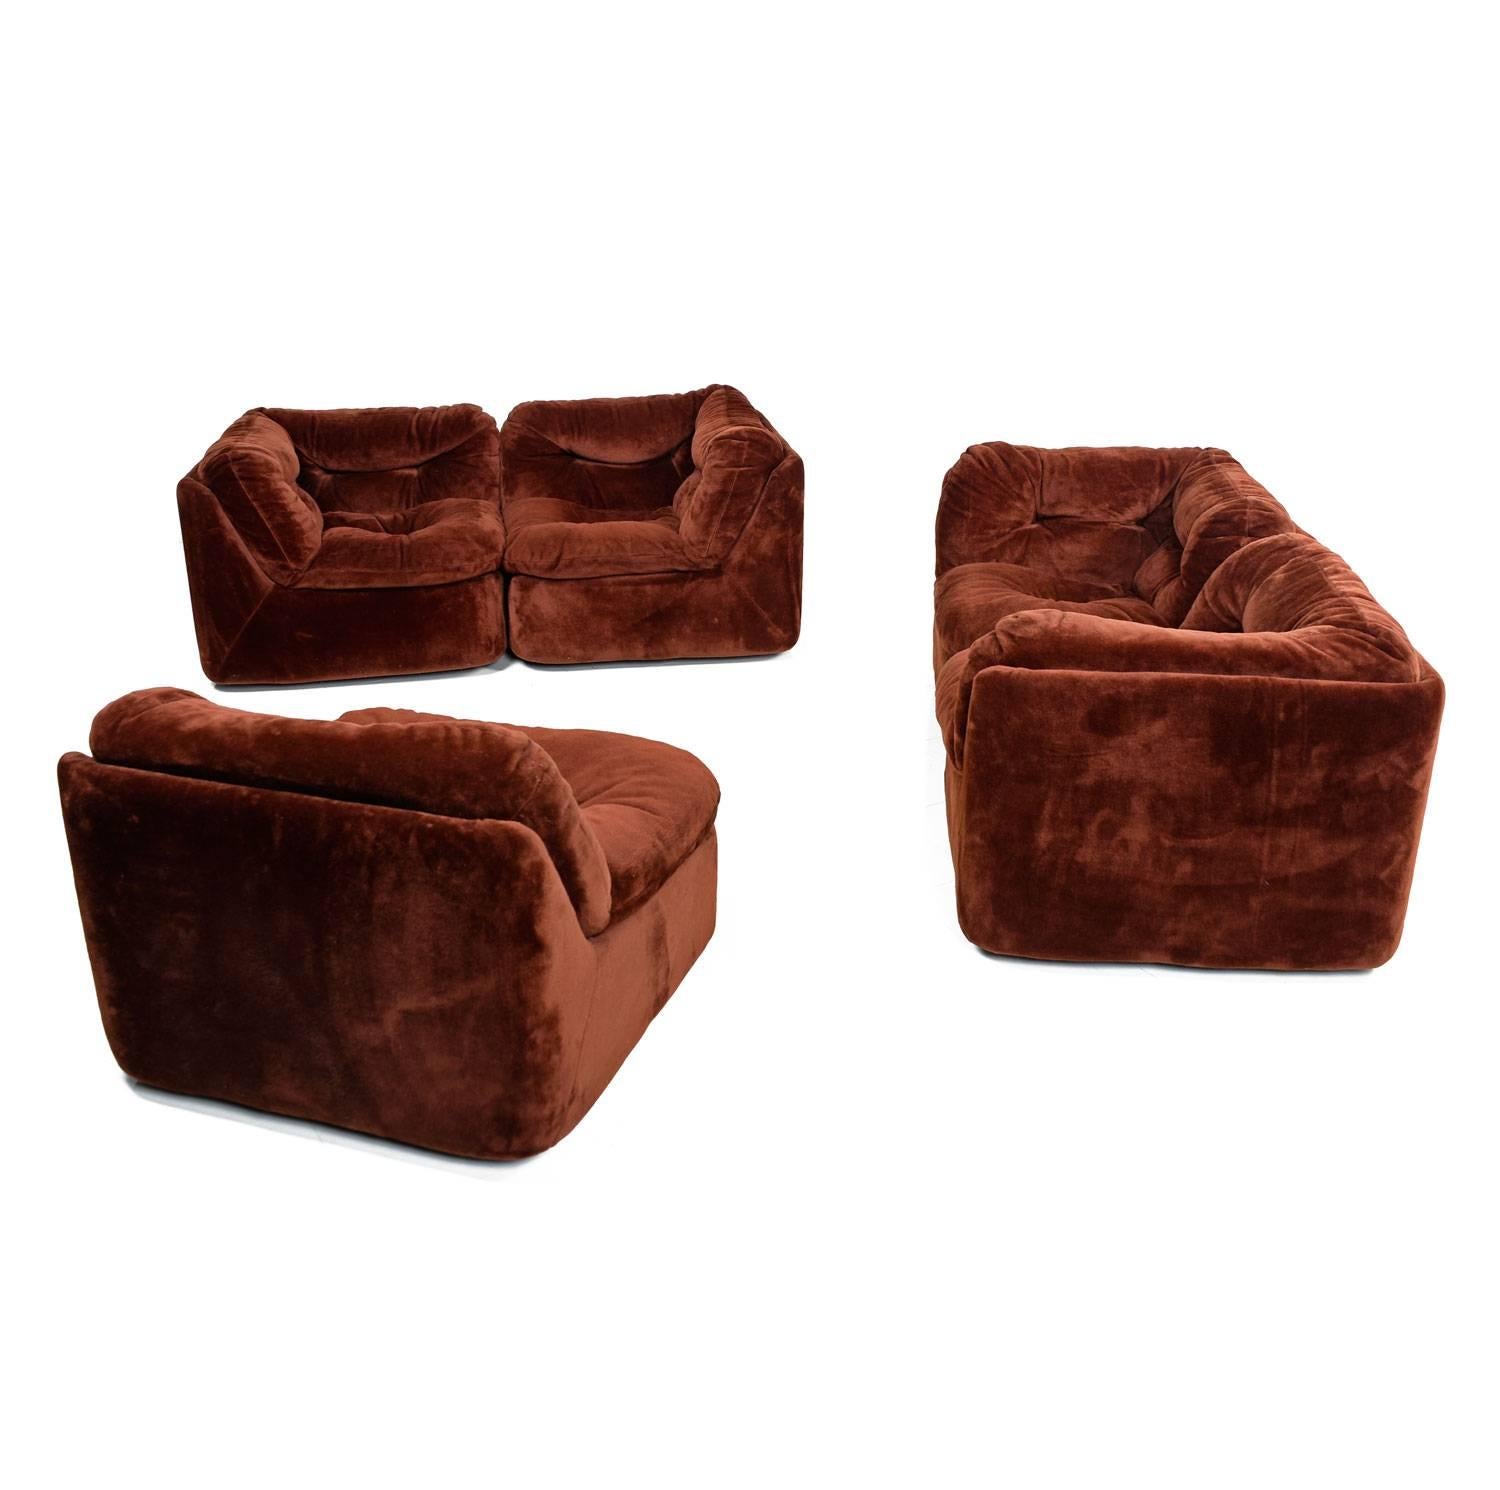 These faux fur beauties are soft and fuzzy to the touch, with plush comfy cushions that invite you to sink into what feels like a warm embrace from a teddy bear. These separate cubes can be set up to your hearts desire, and will bring that 1970s